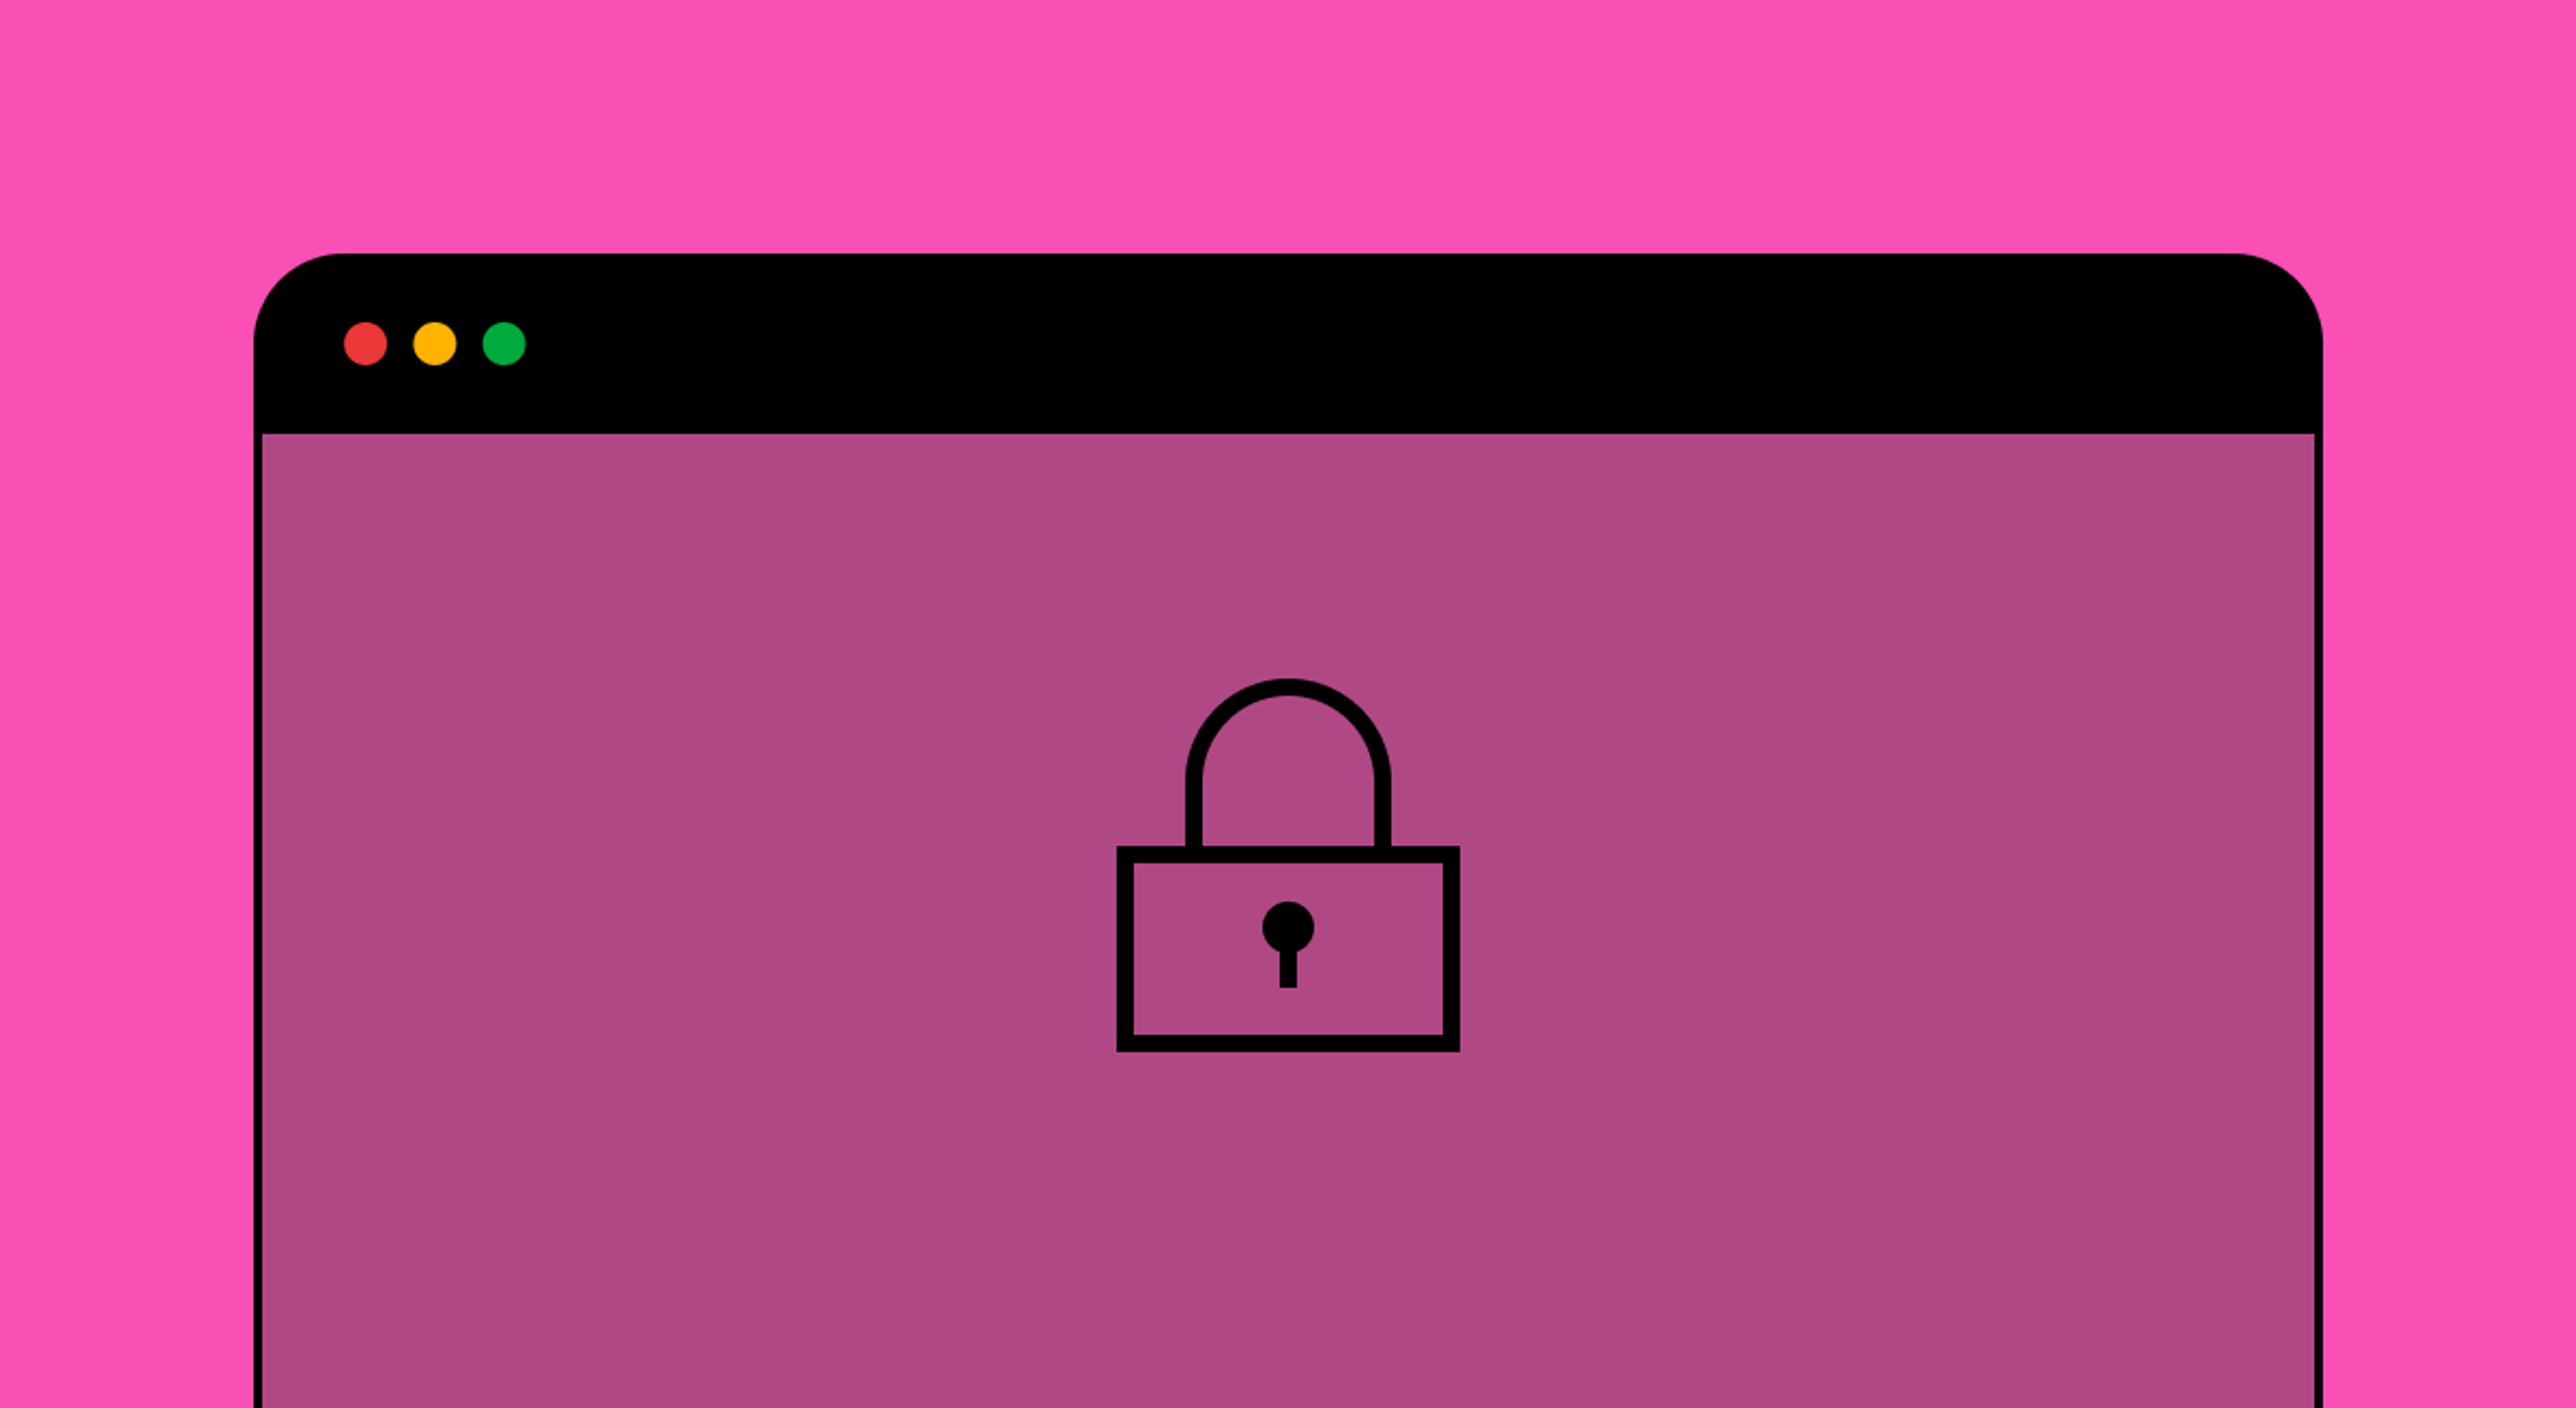 On a pink background is a locked video screen